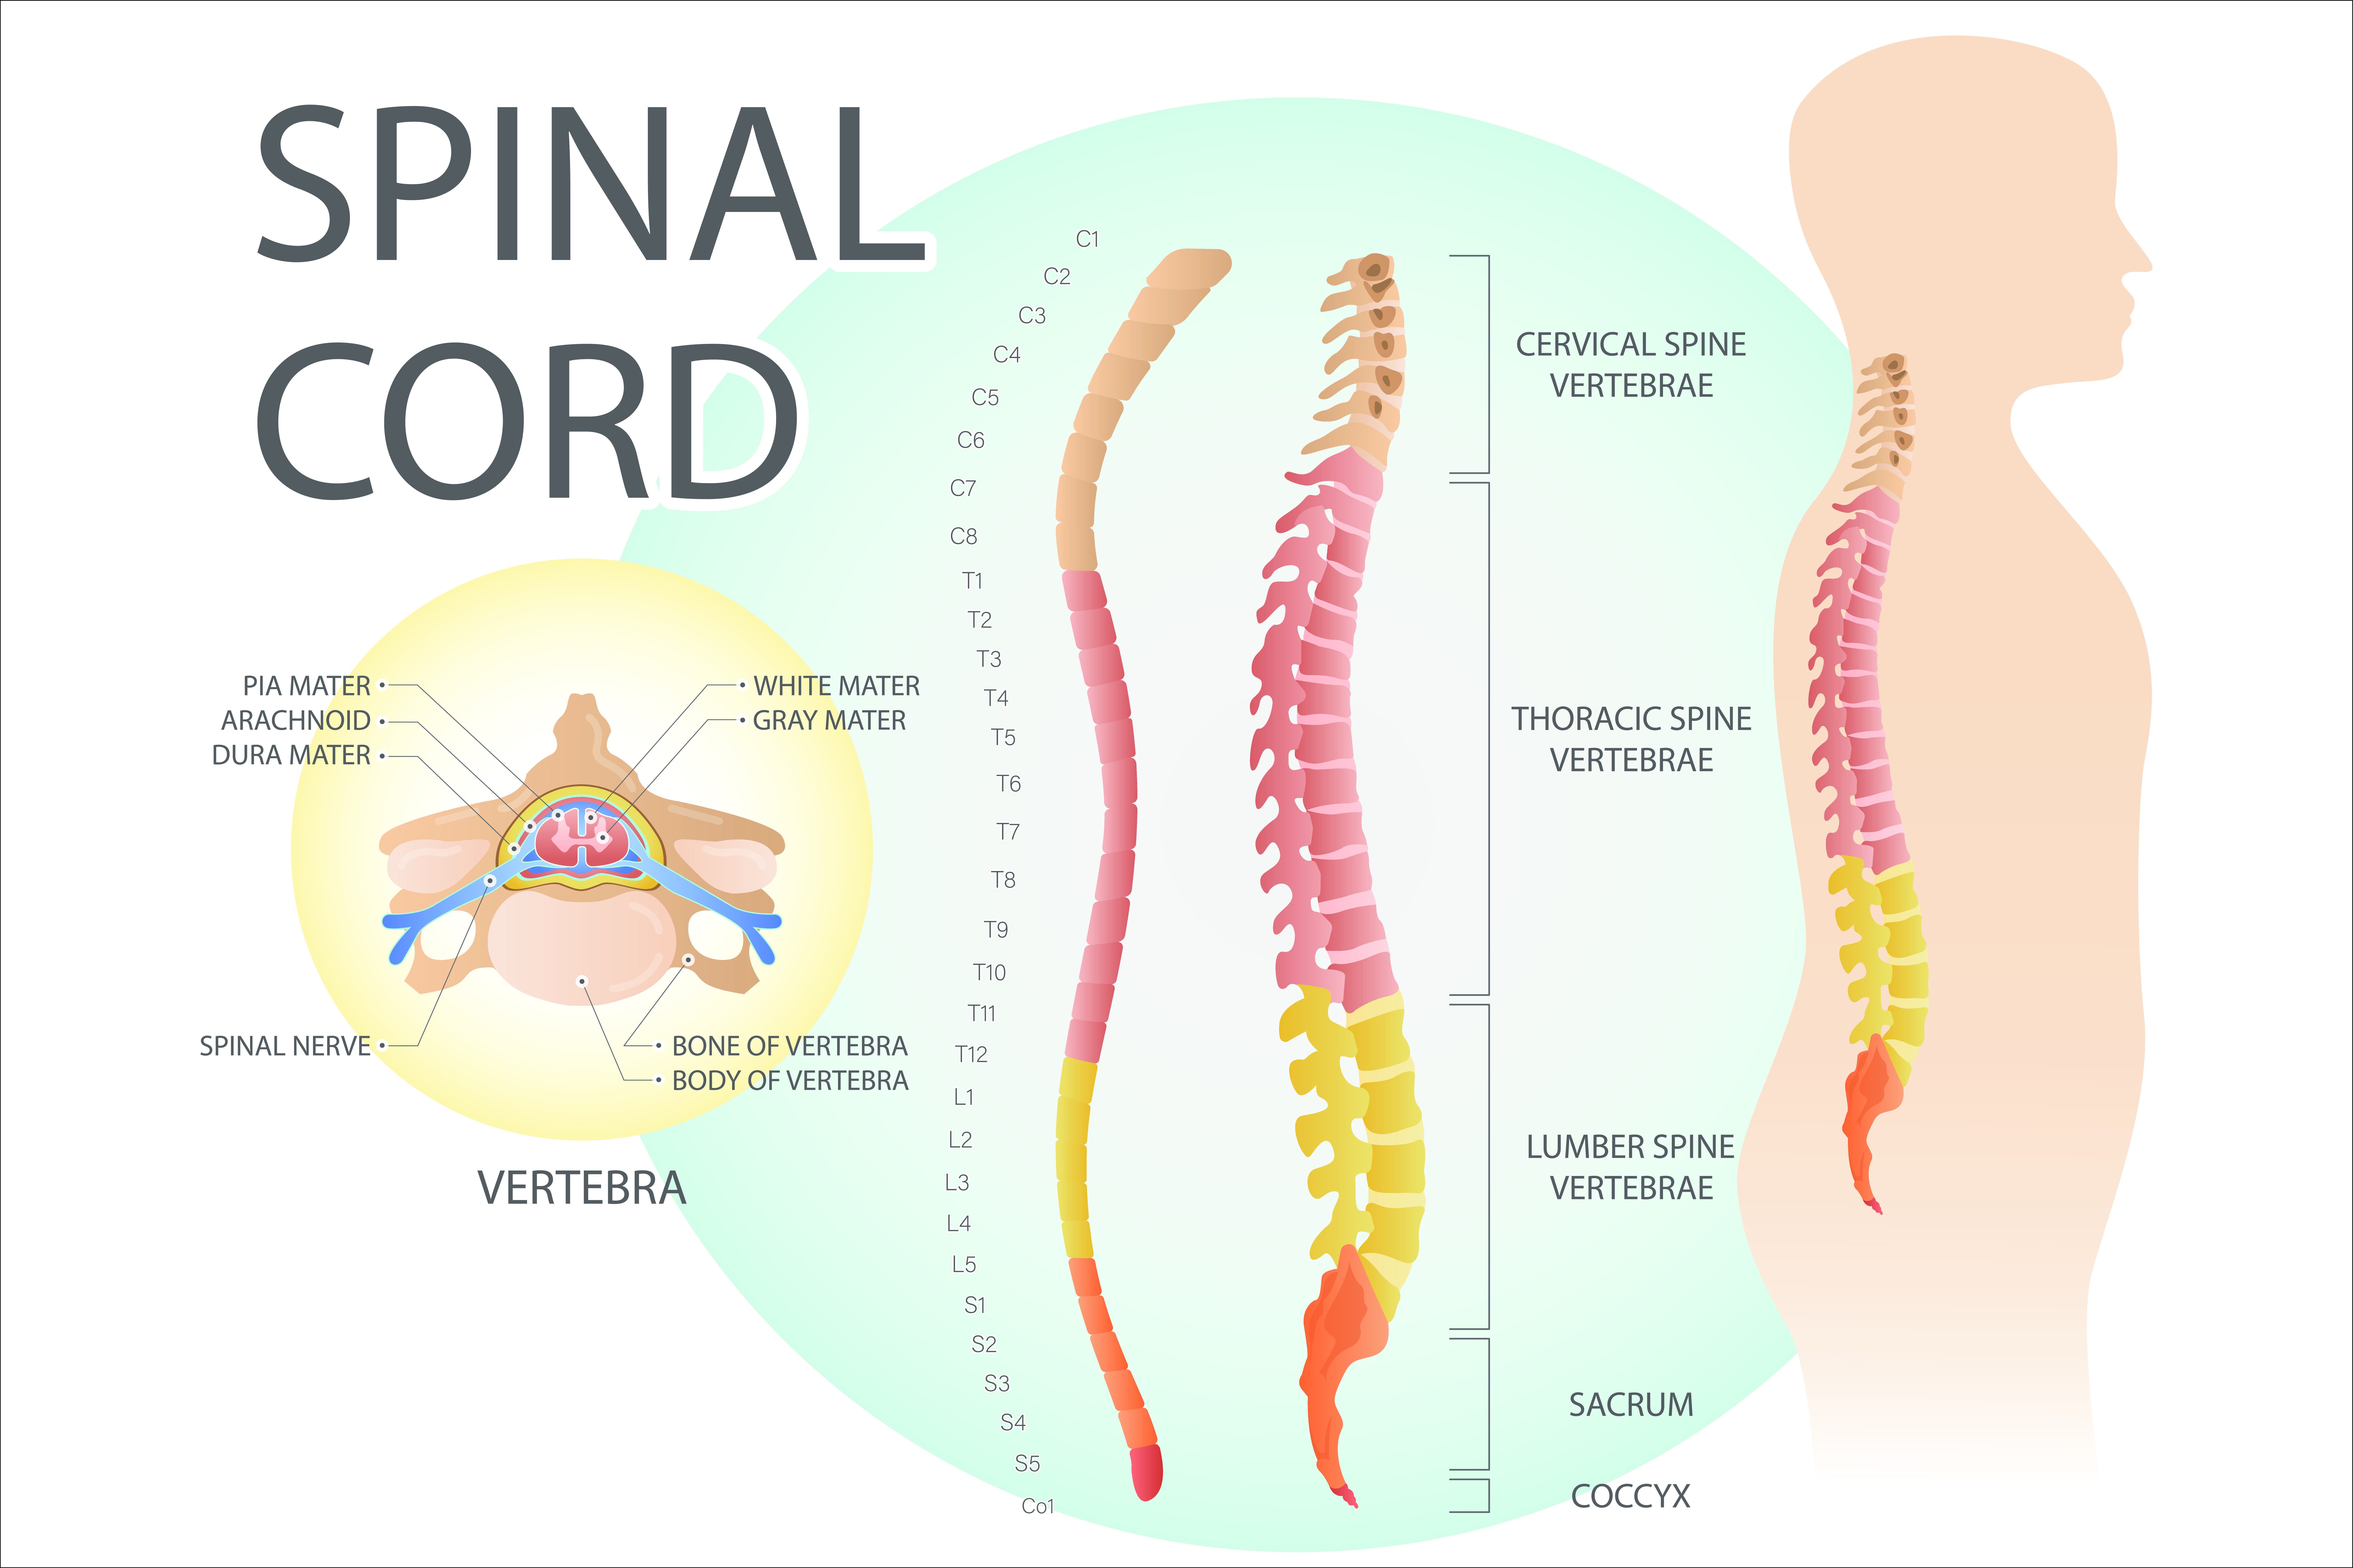 Spinal Cord and Spinal Nerves Diagram